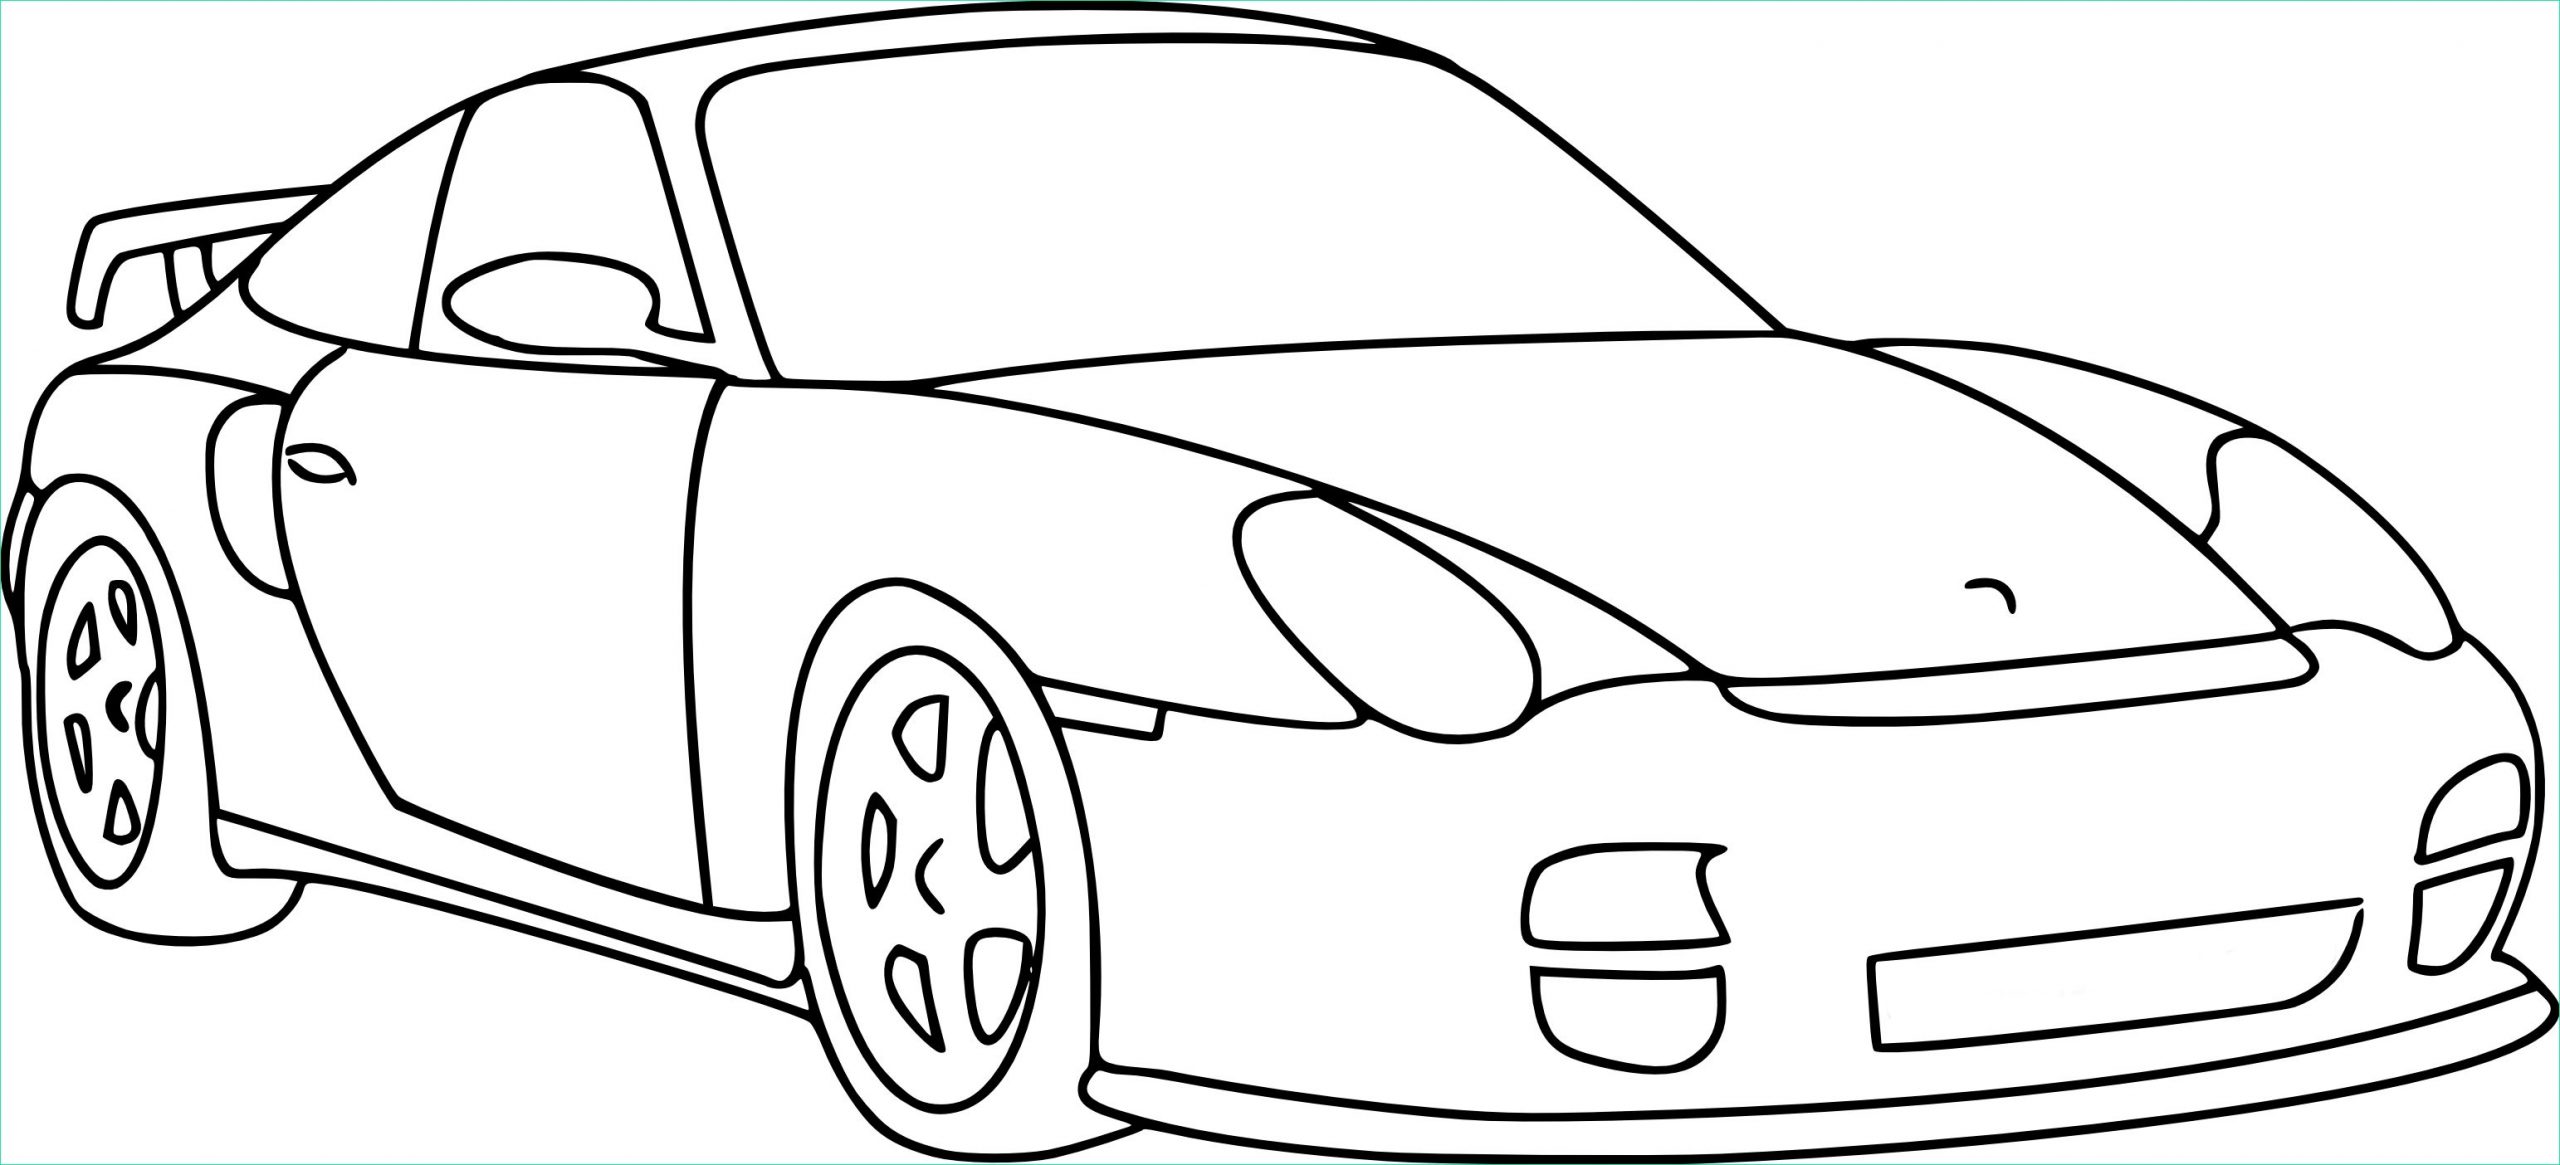 Coloriage Voiture Rallye Inspirant Collection Coloriage Voiture De Rallye Dessin à Imprimer Sur